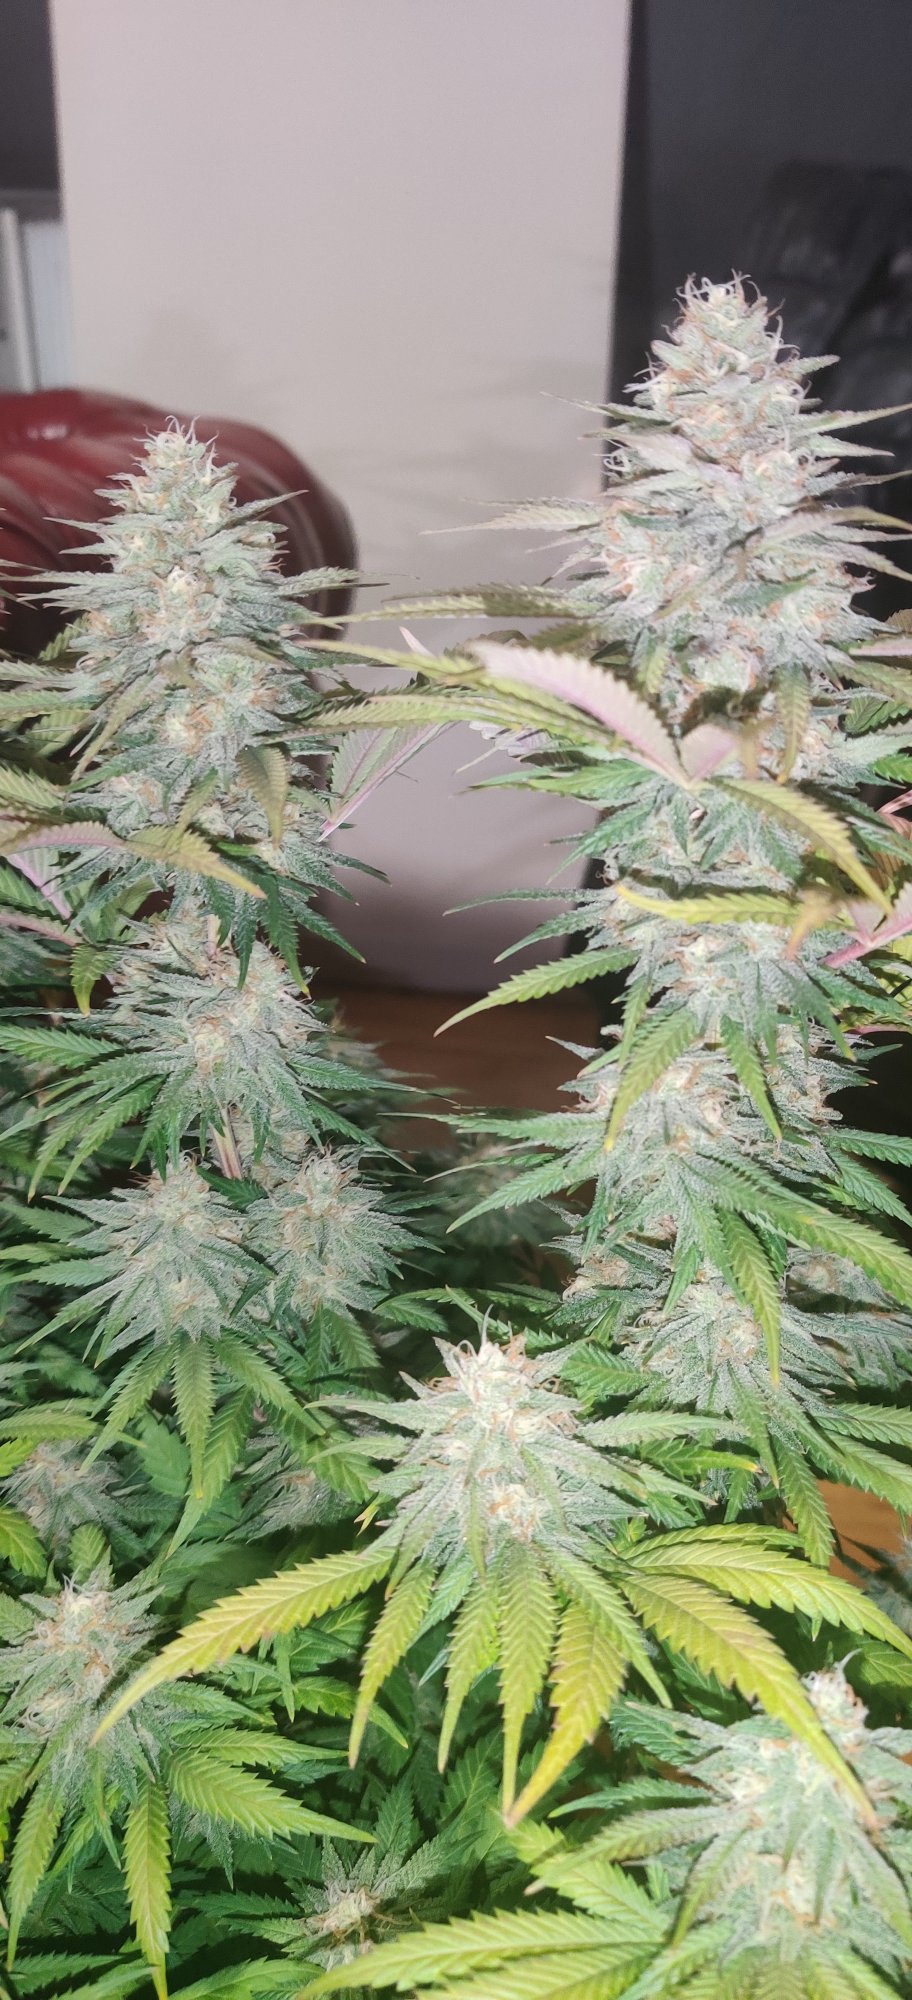 Day 35 is she almost ready already 7